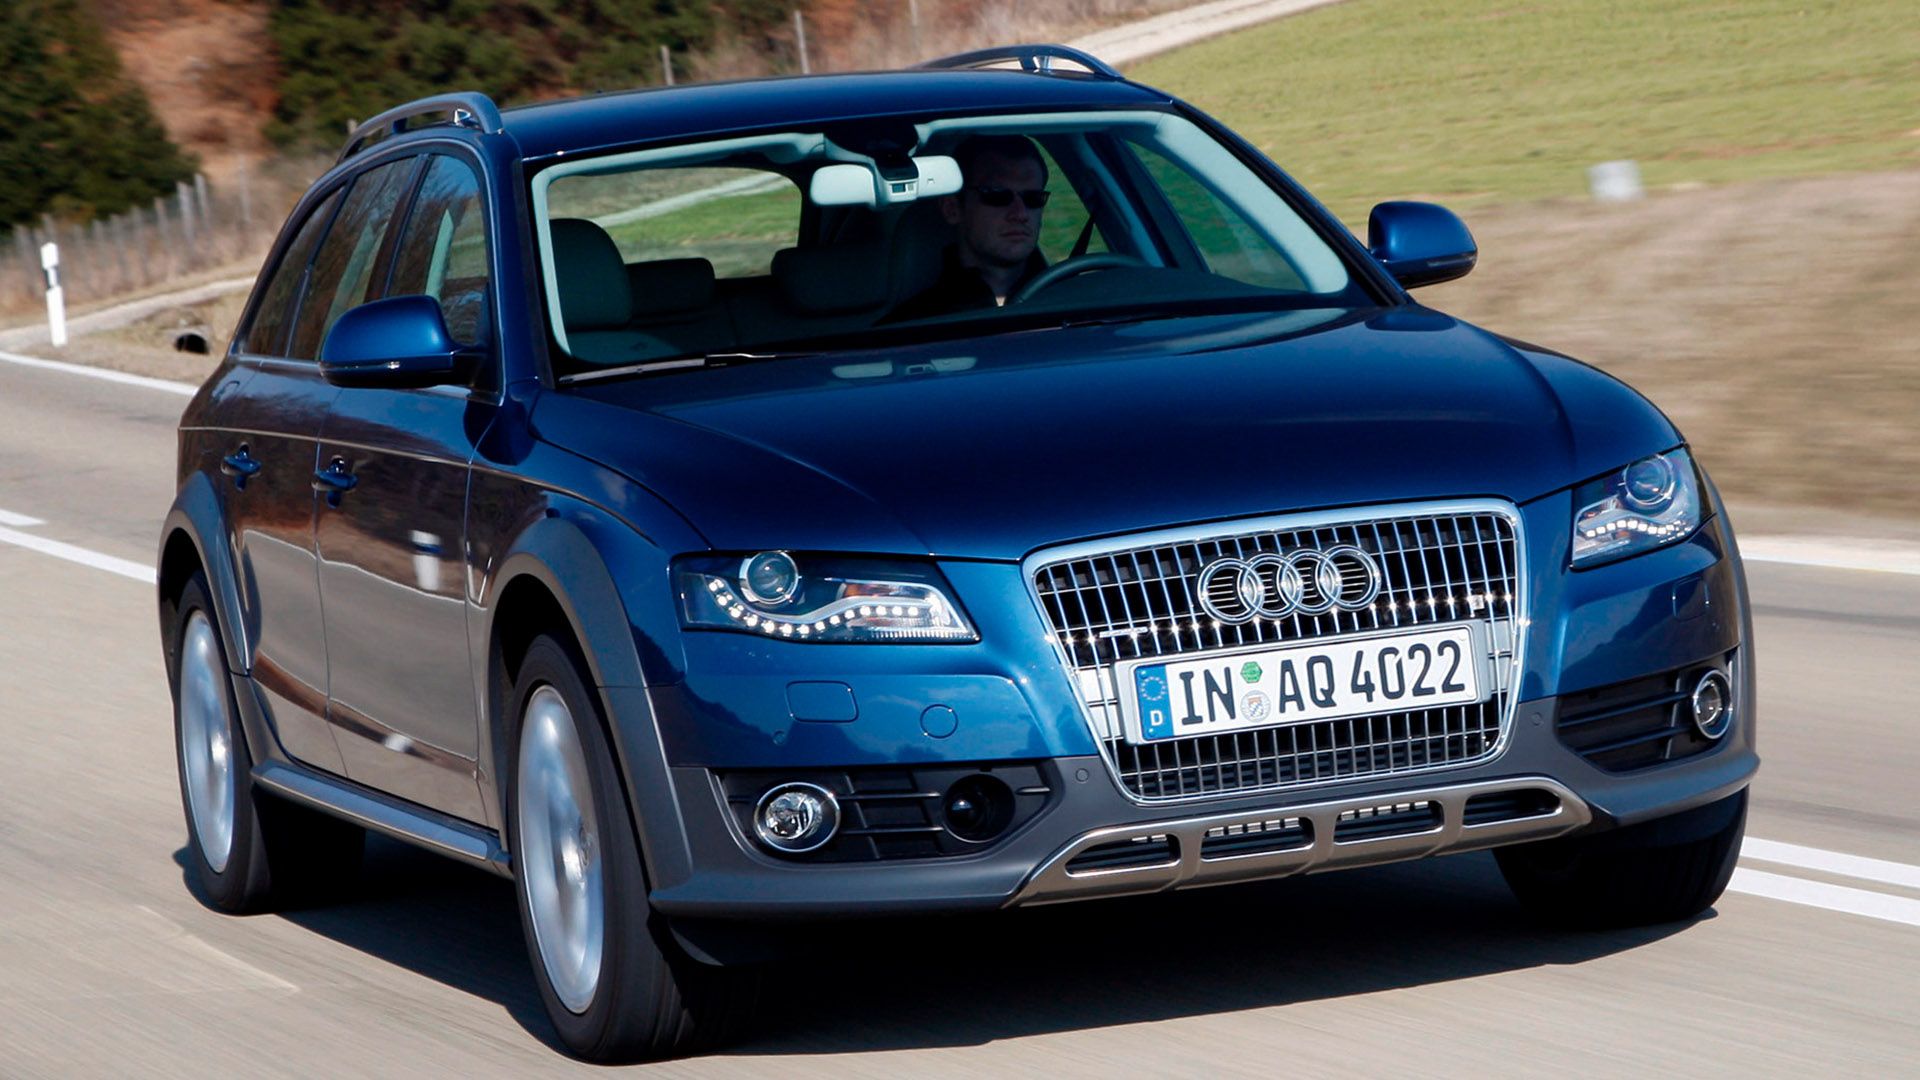 Dark blue Audi A4 allroad quattro driving on a country road